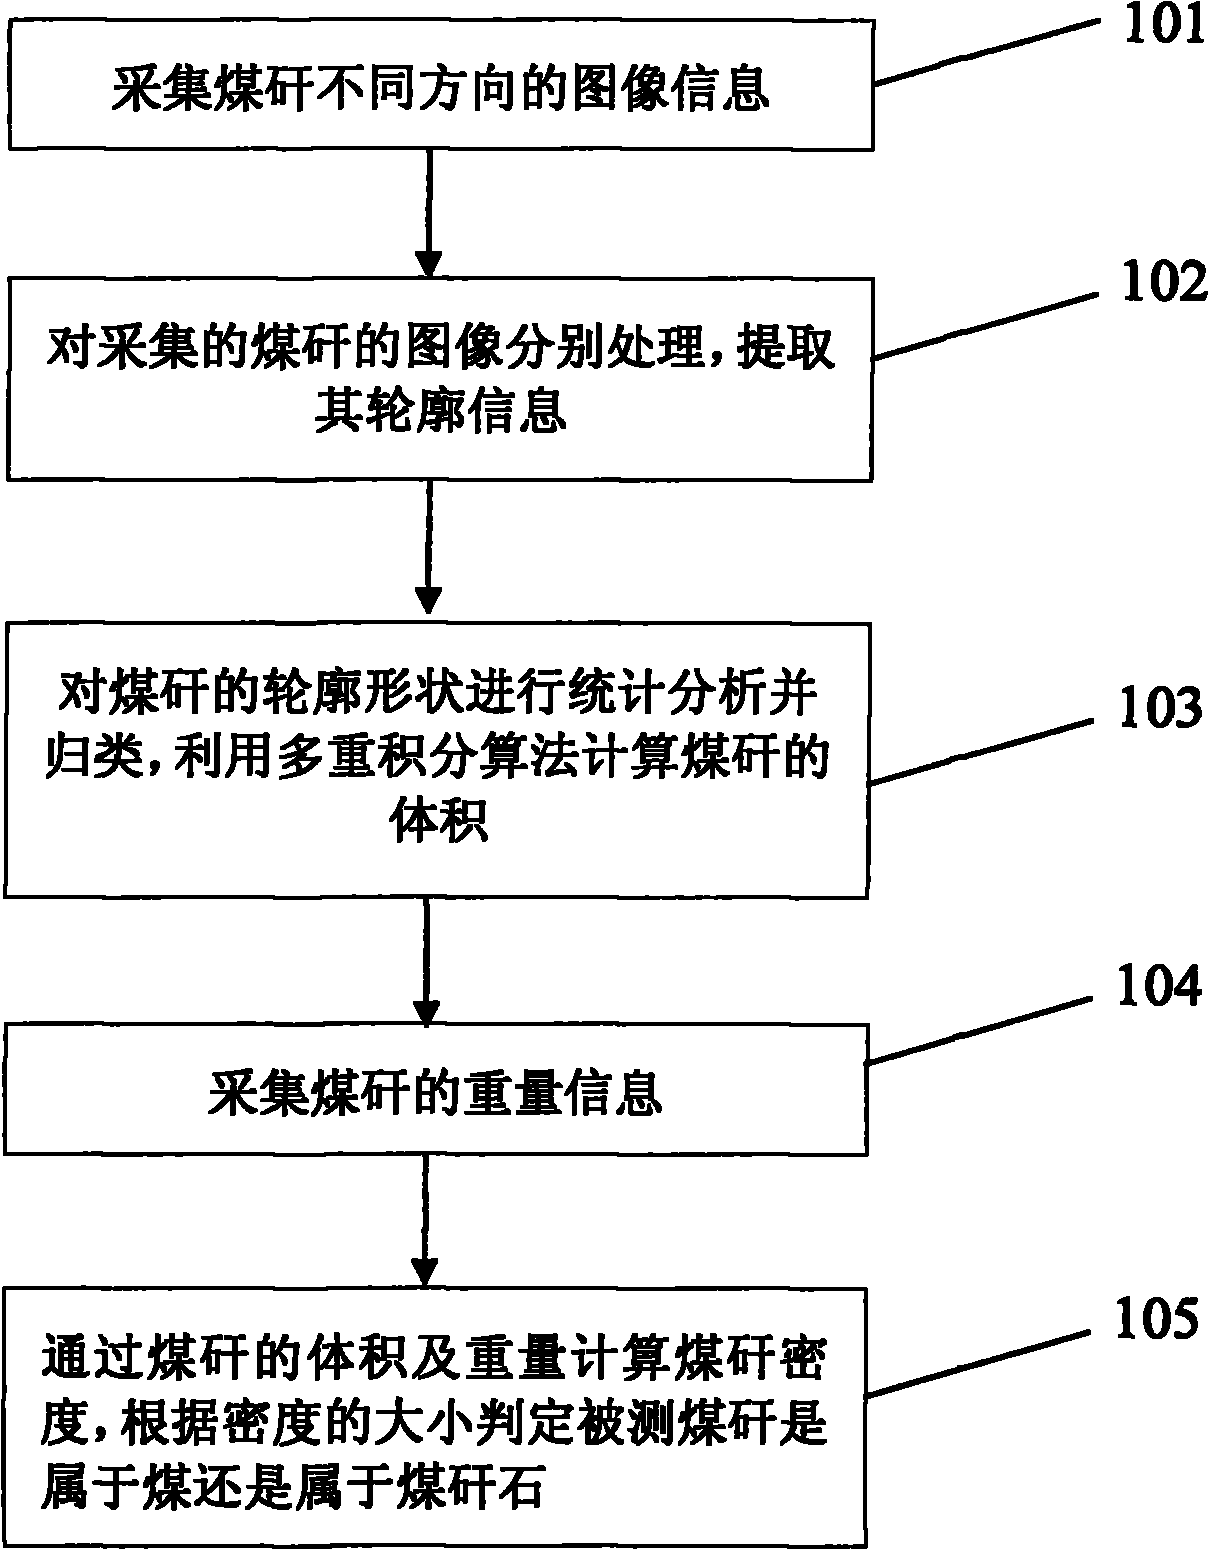 Method and device for sorting coal and gangue online through image method